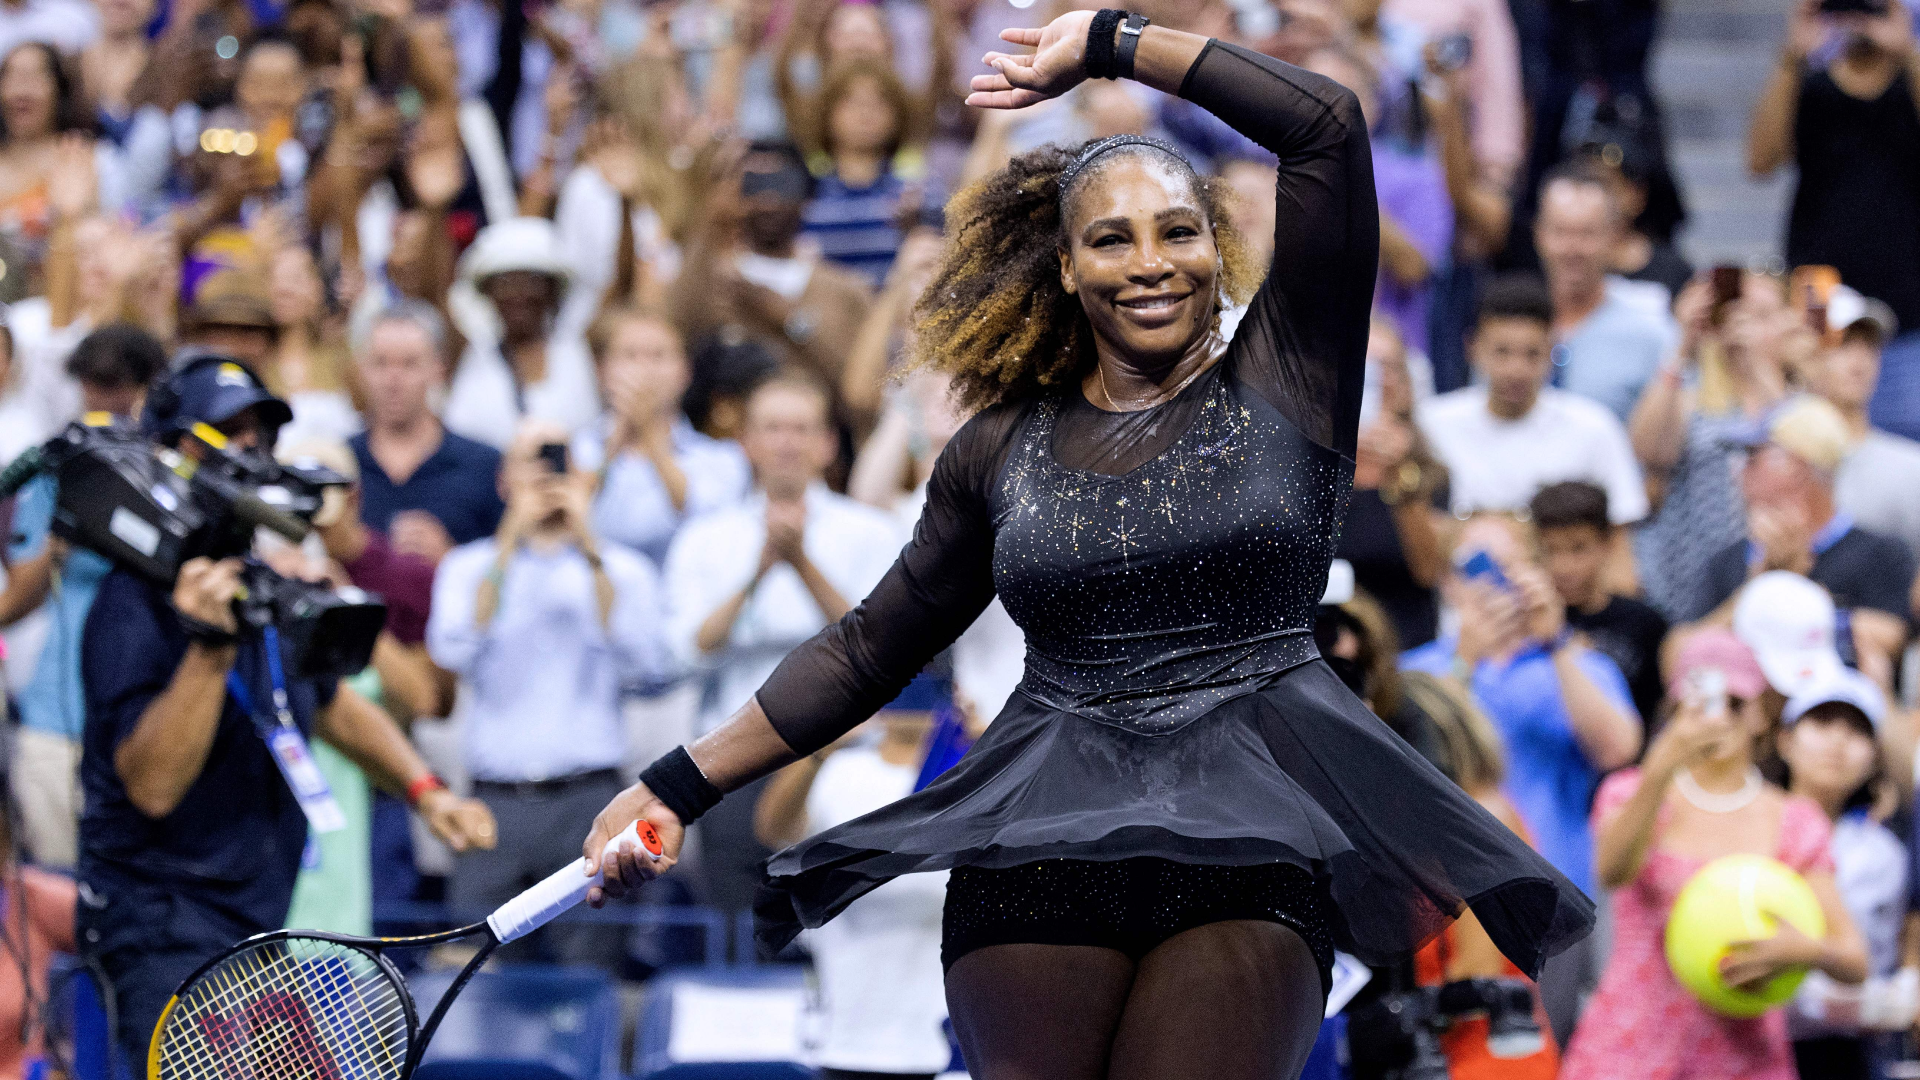 Serena Williams begins her farewell campaign at the US Open with a tough victory against Kovinic